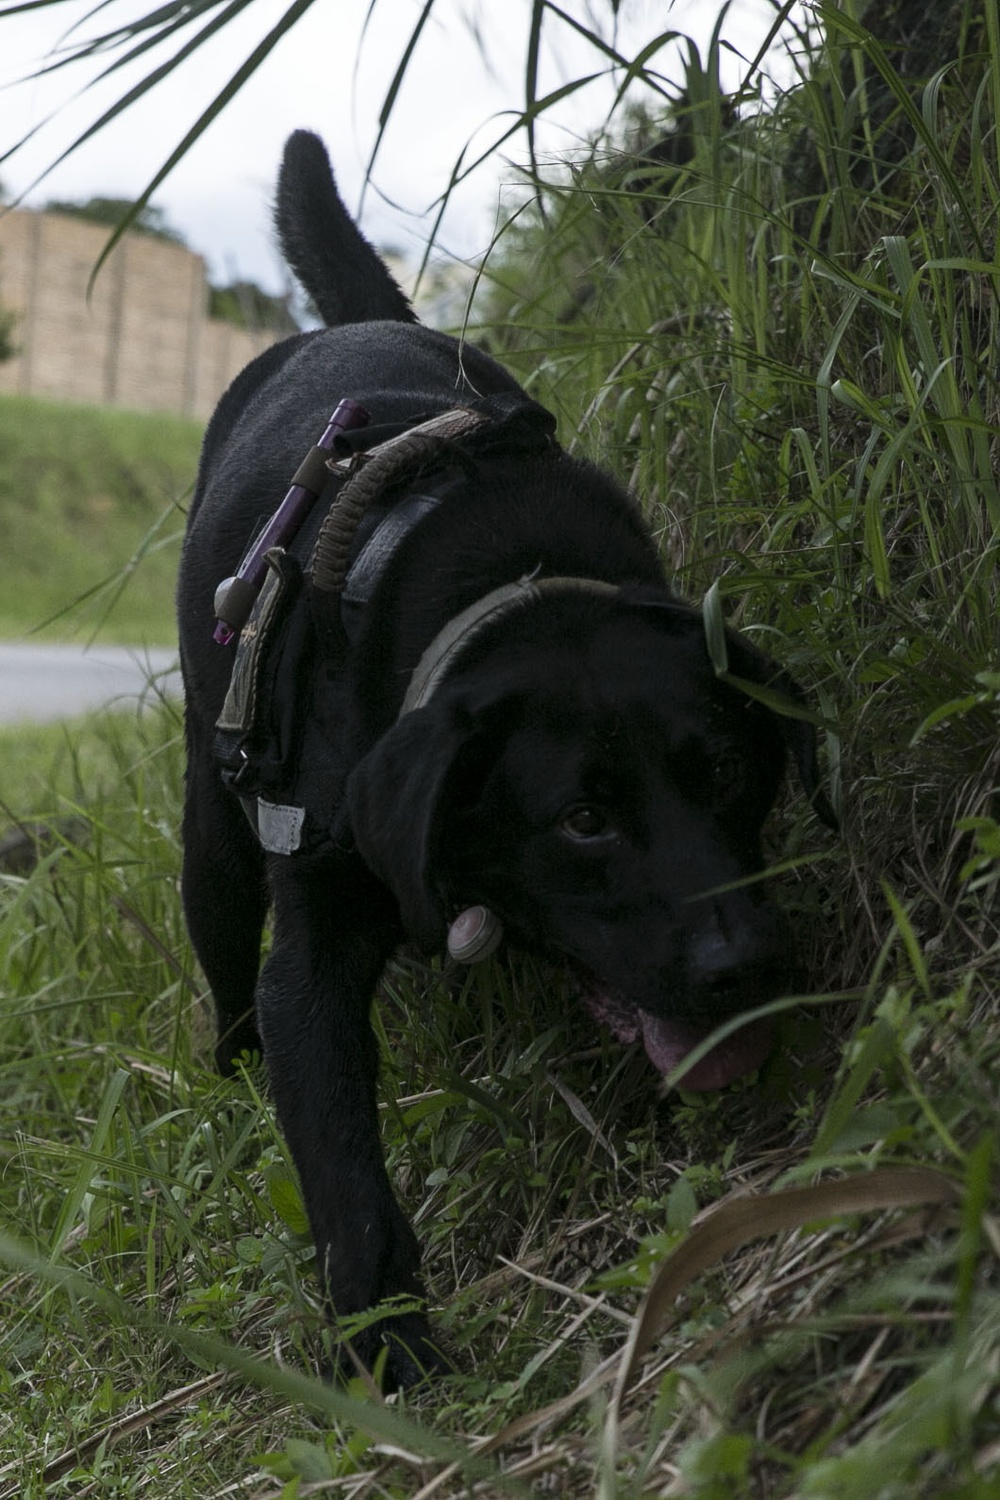 Paw Patrol: Military working dogs execute explosive detection training